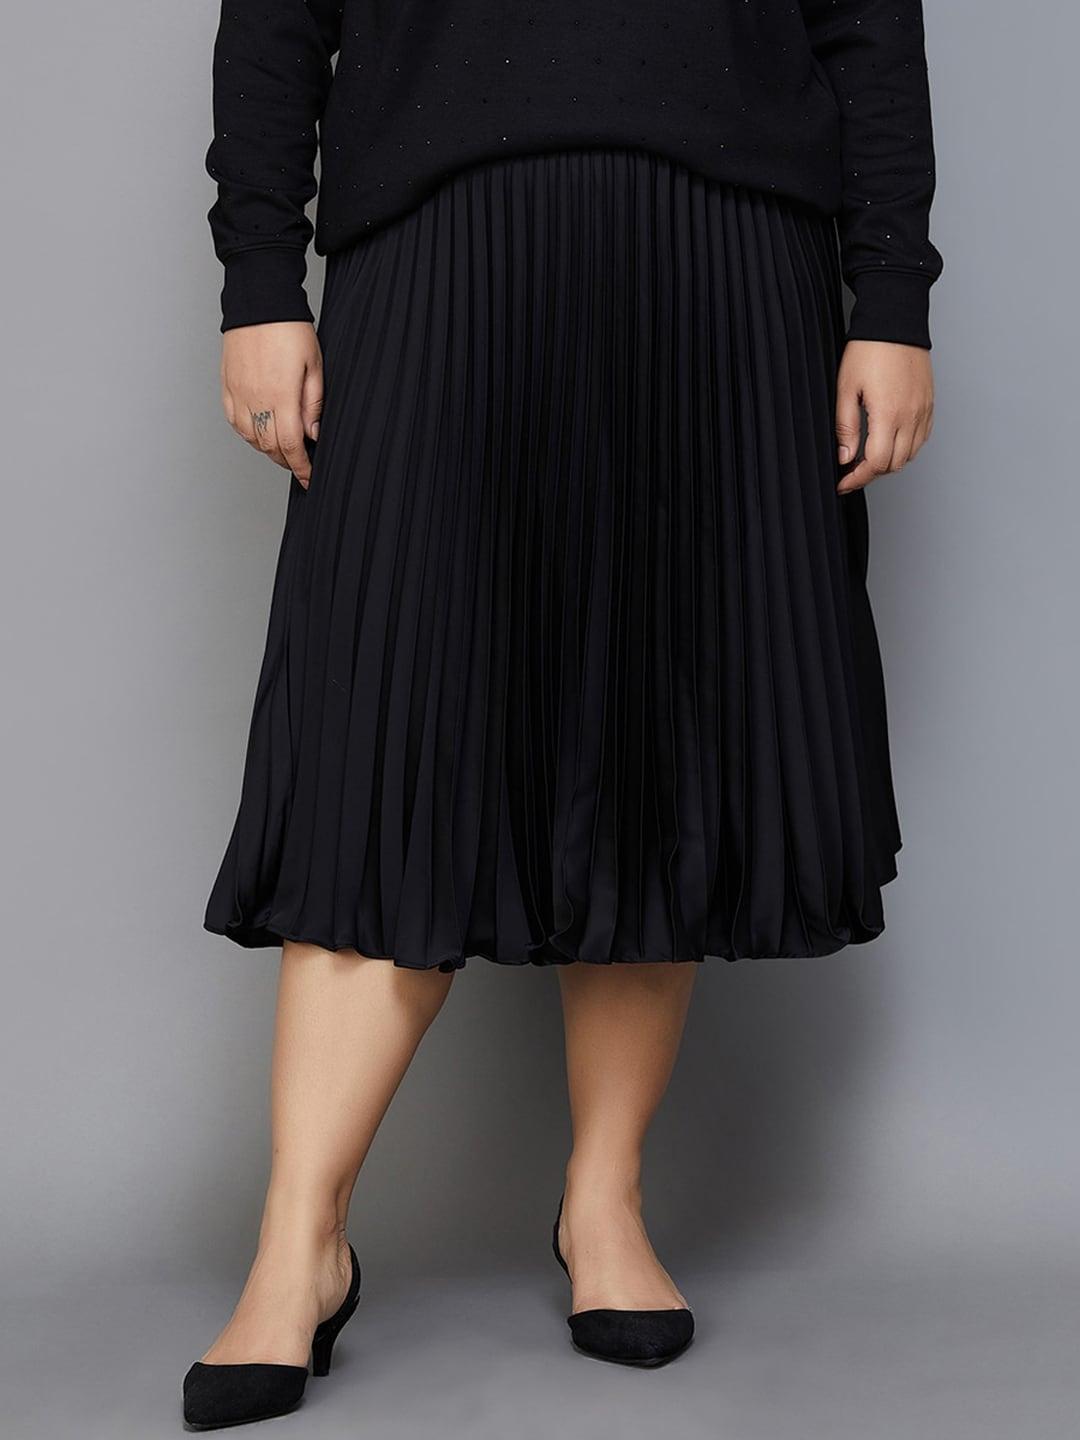 nexus-by-lifestyle-a-line-accordion-pleated-skirt